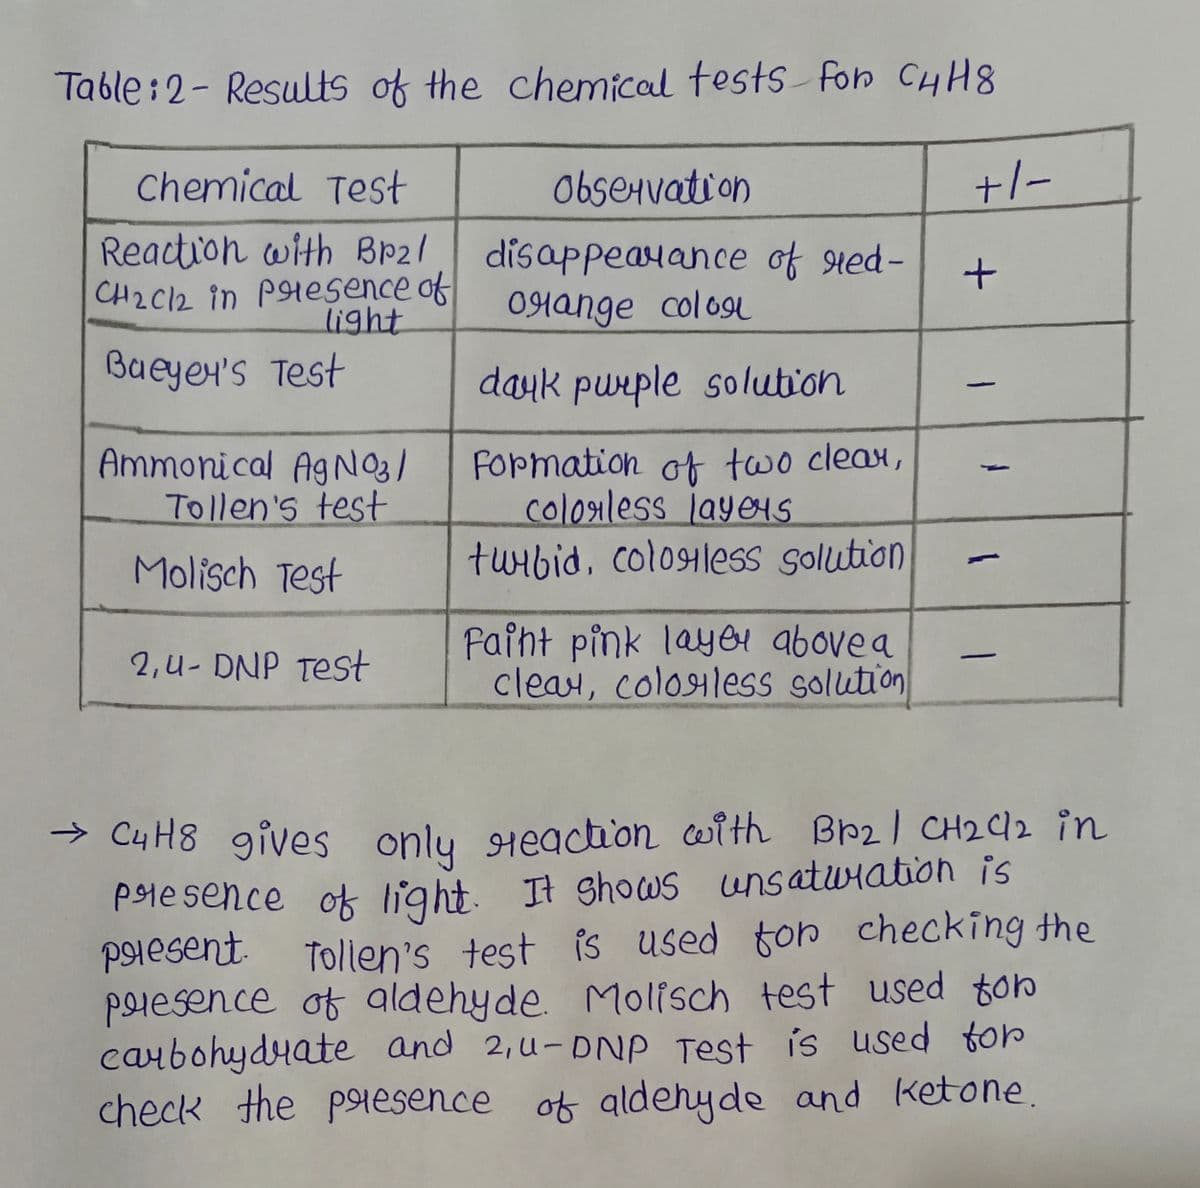 Table:2- Results of the chemical tests Fon CHH8
Chemical Test
ObseHvation
+/-
Reaction with Br2/
CH2C12 in PHesence of
light
disappeayance of red-
0Hange colo9
Bueyer's Test
dayk purple solution
Ammonical AgN O
Tollen's test
Formation of two clear,
cologless jayeS
twibid, coloHless solution
Molisch Test
Faiht pink layer abovea
clean, coloHless solution
2,u- DNP Test
-
→ Cy H8 gives only Heacaion with Br2| CH2(12 in
Plesence ok light. It shows unsatwiation is
PAESENT.
poiesence of aldehyde. Molisch test used ton
caubohydyate and 2,u-DNP Test is used tor
check the paesence of aldehyde and Ketone
Tollen's test is used ton checking the
